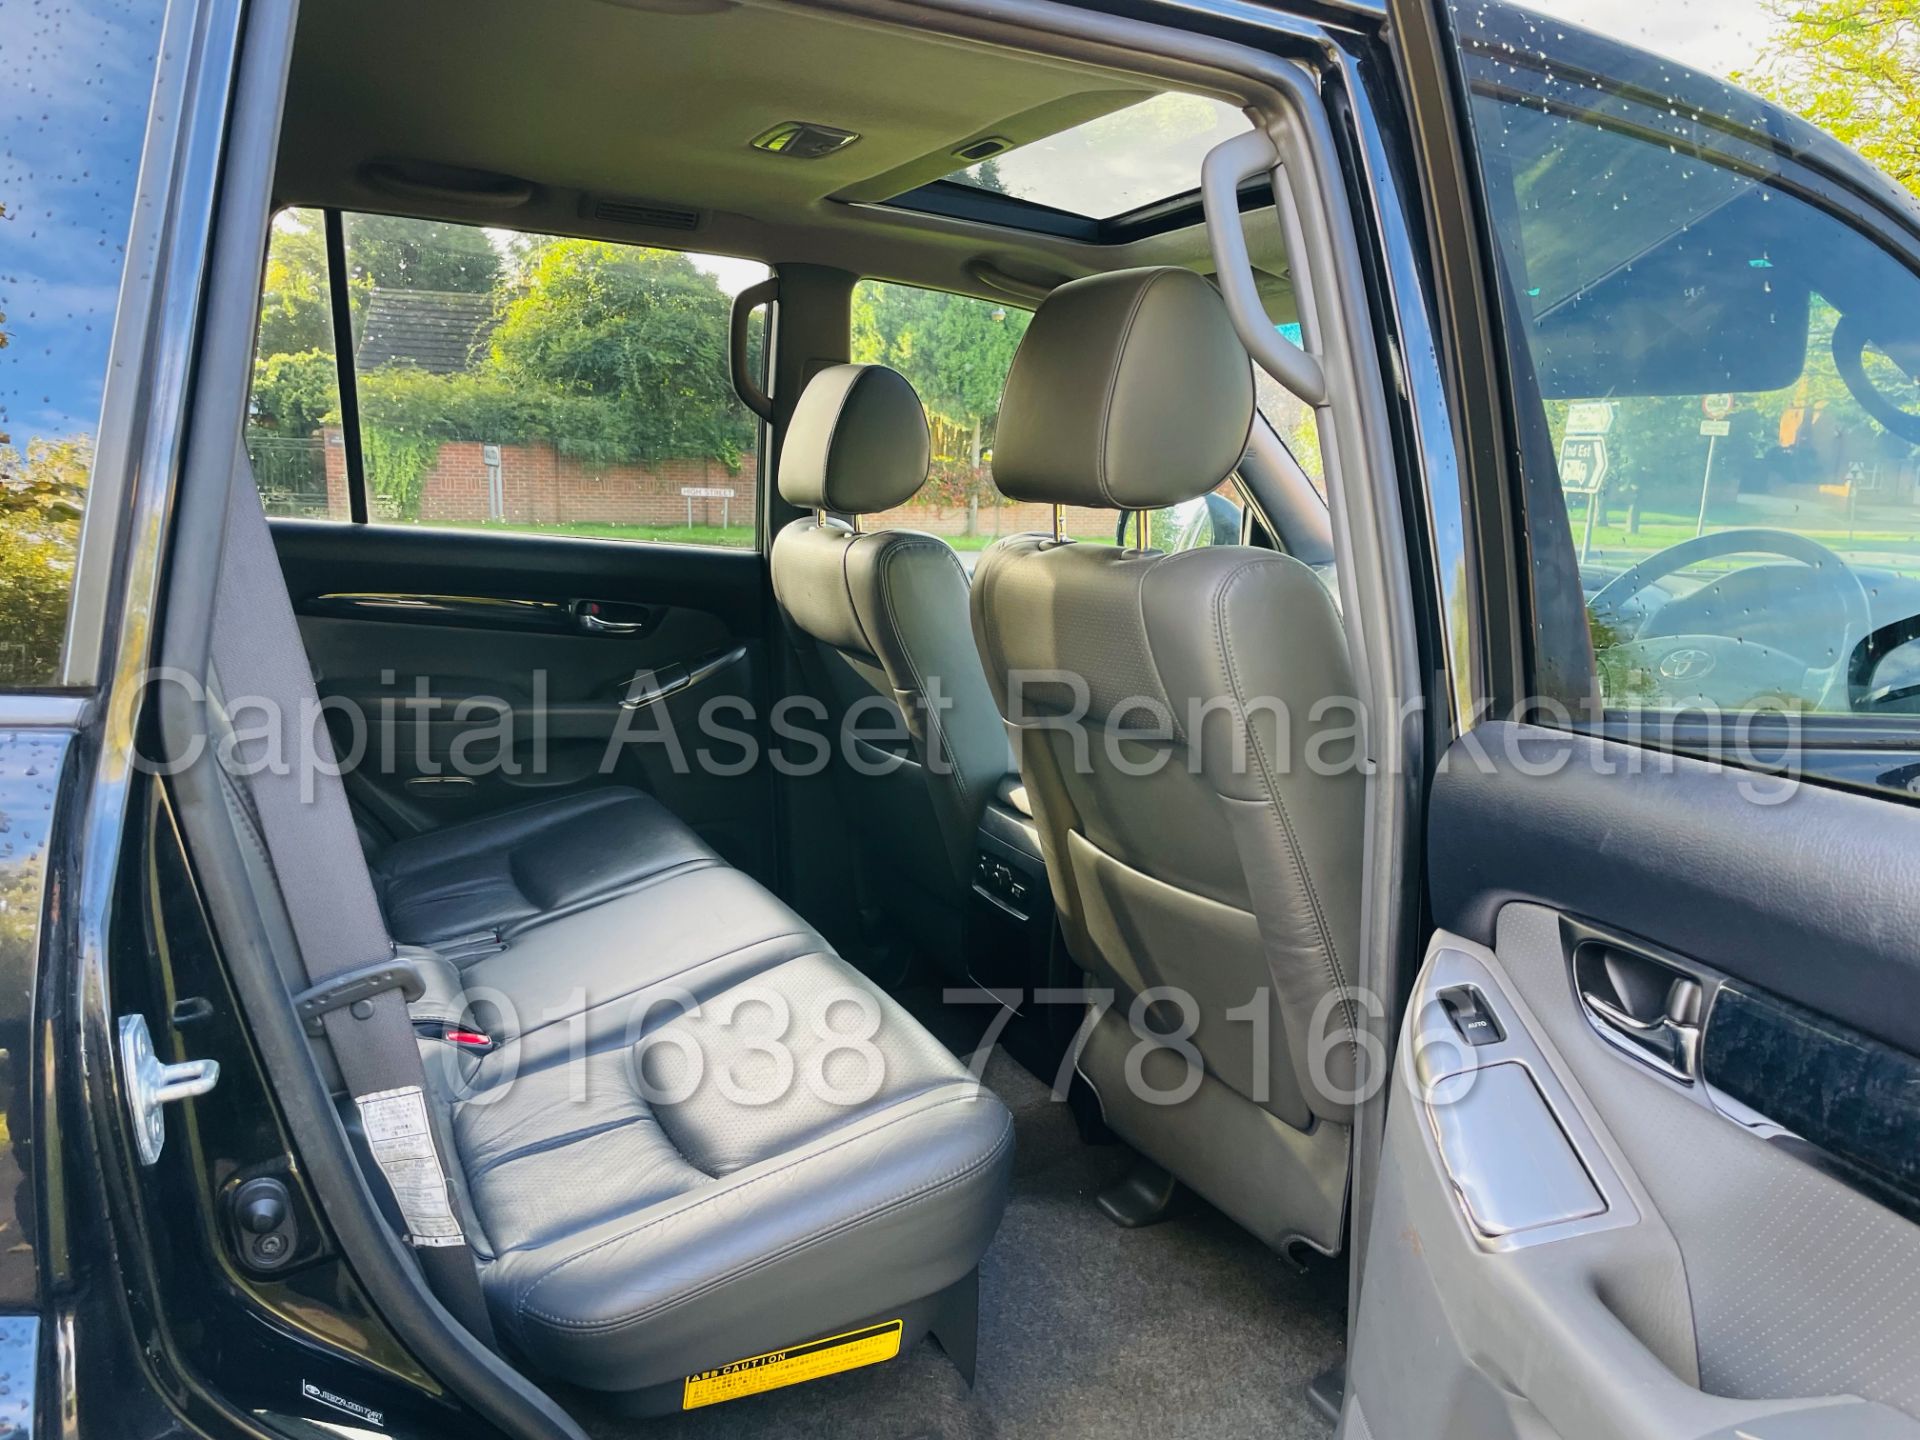 TOYOTA LAND CRUISER *INVINCIBLE* 7 SEATER SUV (2008) '3.0 D-4D - AUTO' *LEATHER & NAV* (1 OWNER) - Image 37 of 62